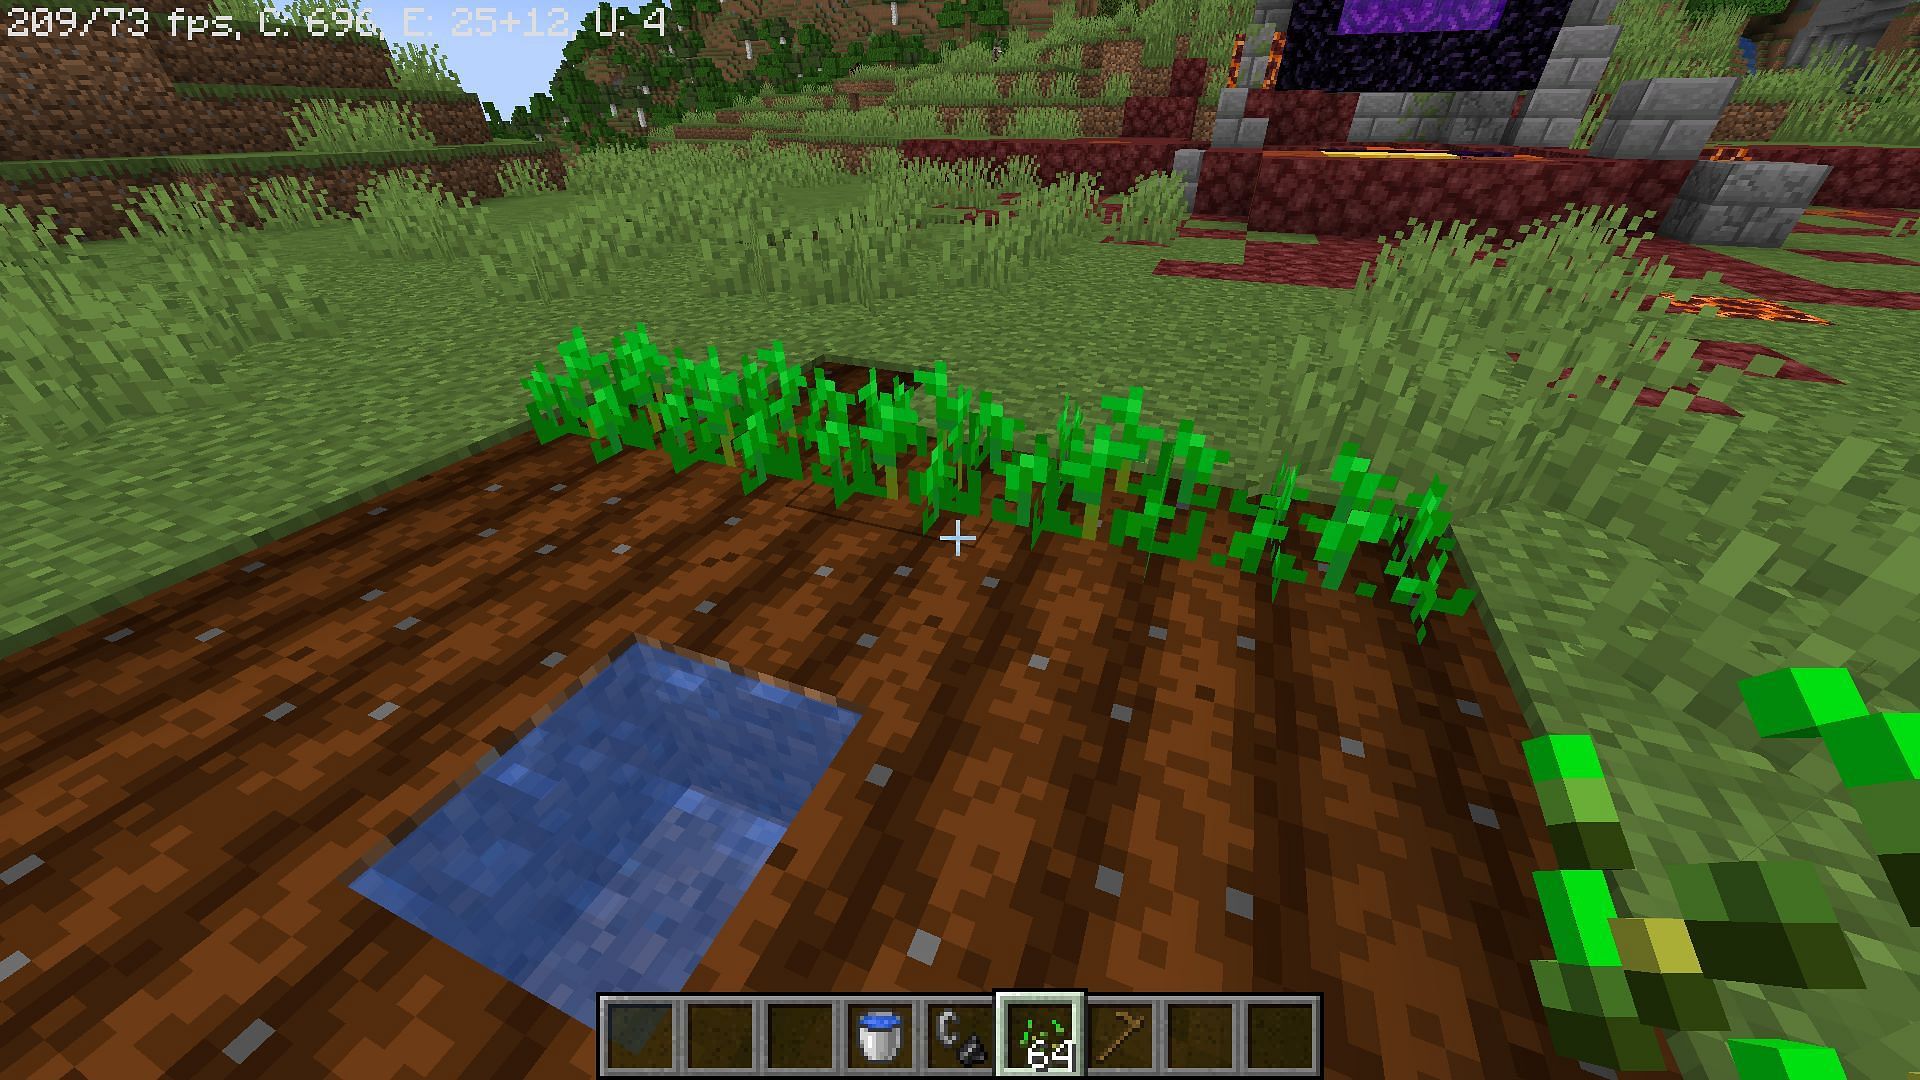 When used as a hoe, dirt blocks convert to farmlands which can be used to sow seeds and grow crops in Minecraft (Image via Mojang)